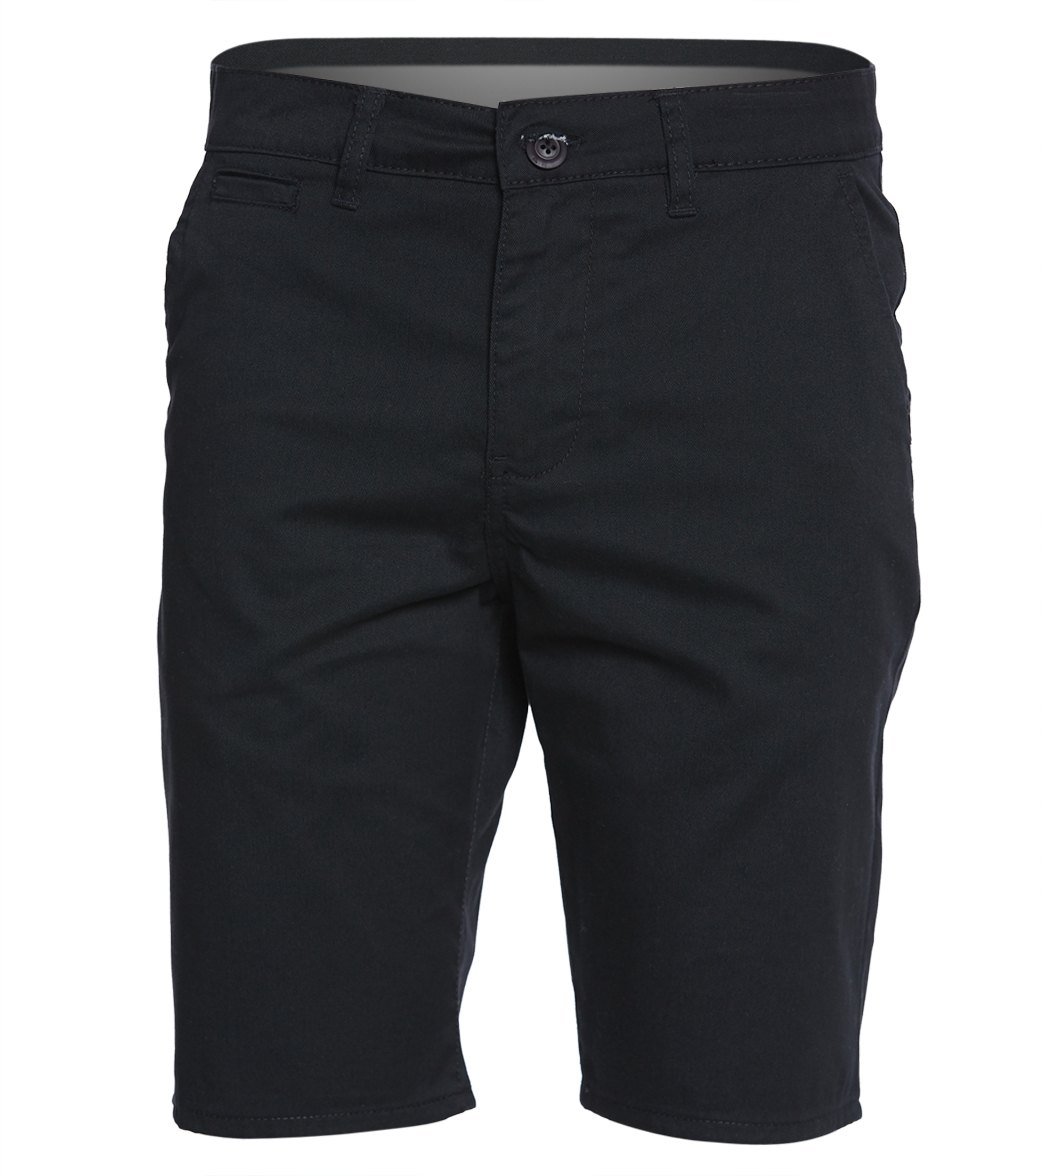 Quiksilver New Everyday Union 21 Stretch Walkshorts - Black 33 Cotton/Polyester - Swimoutlet.com